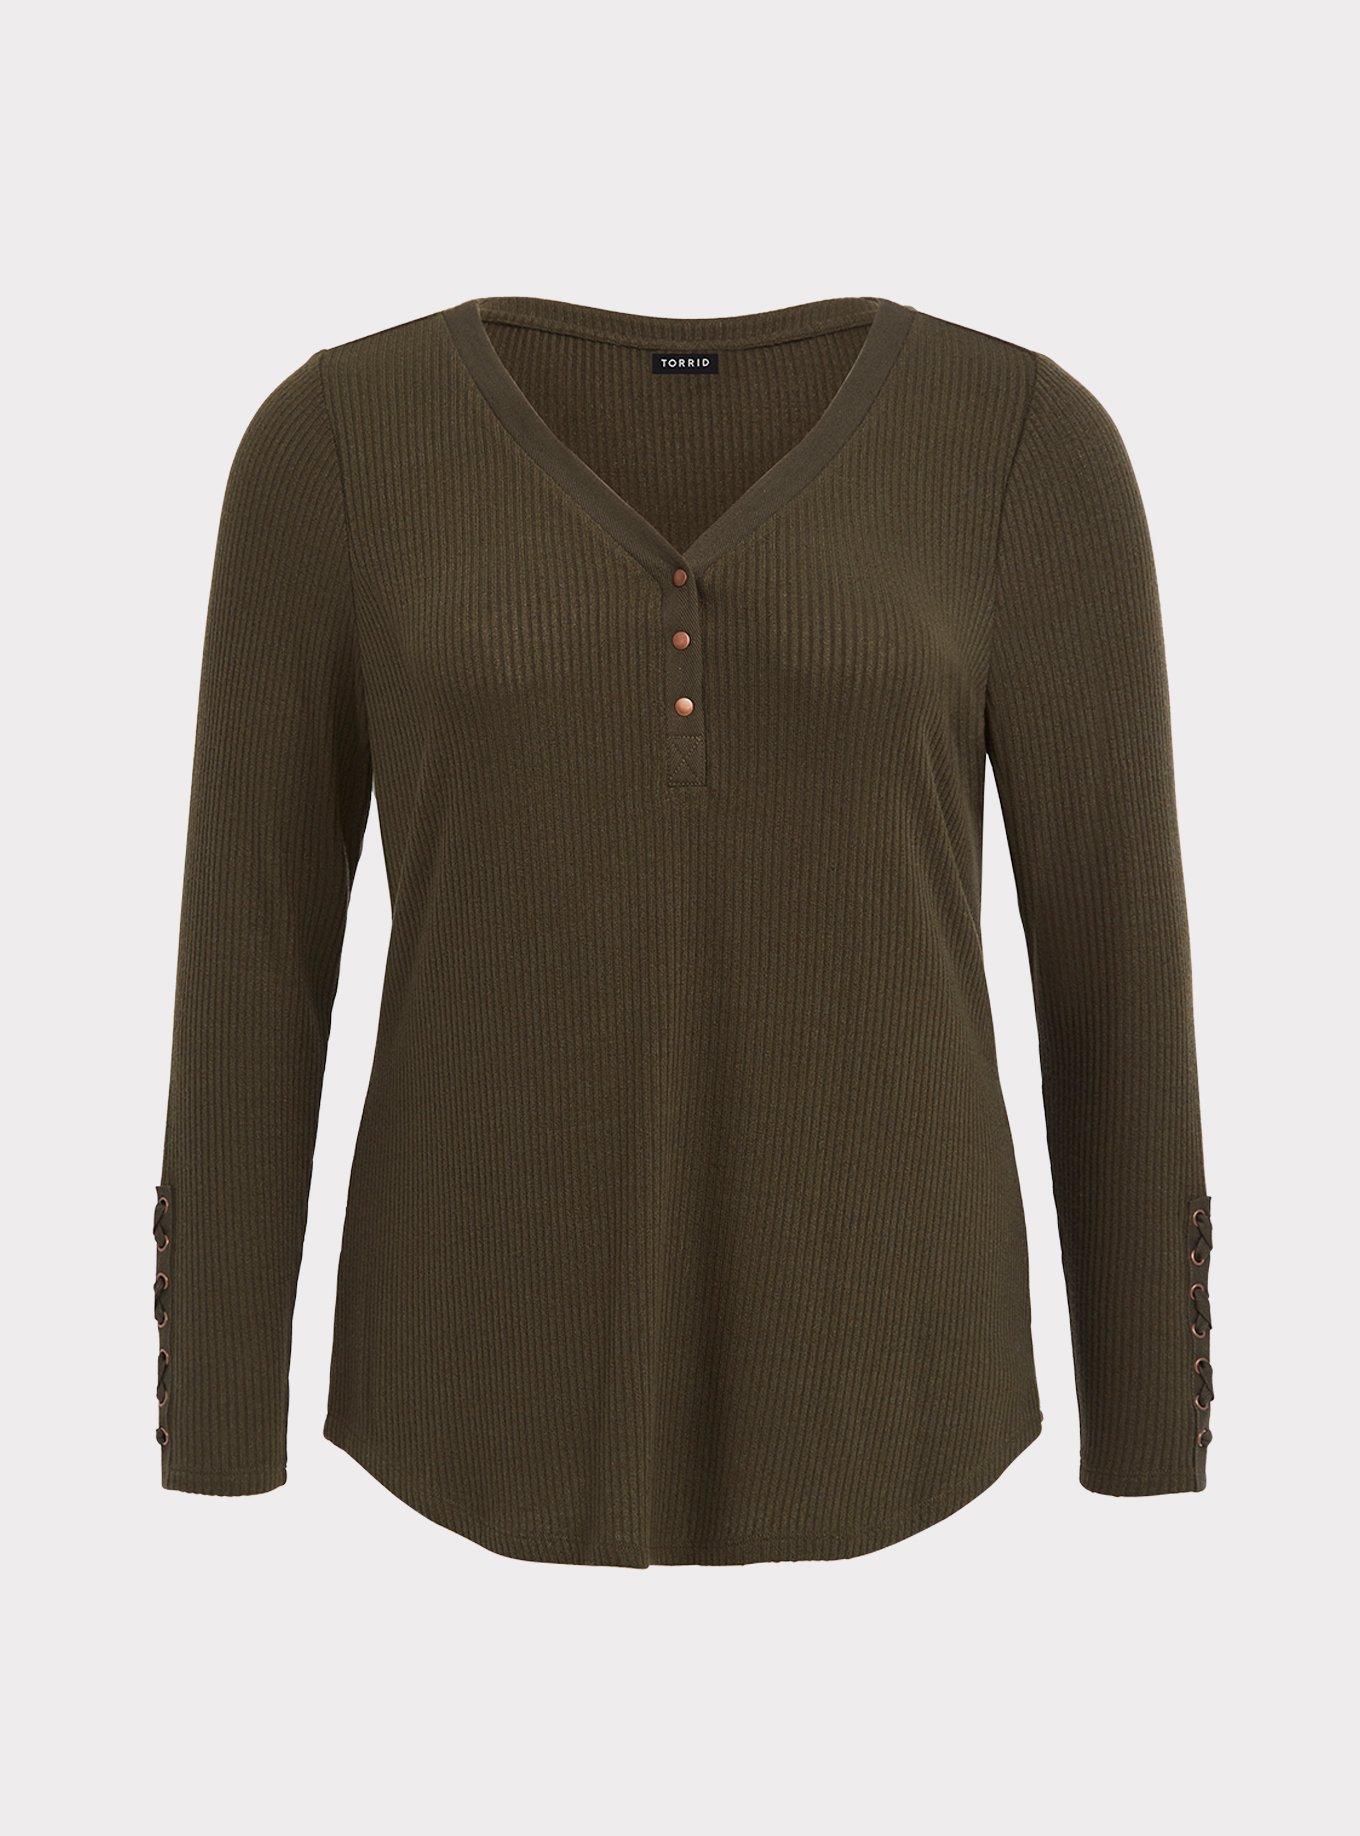 Plus Size - Olive Ribbed Henley Tee - Torrid